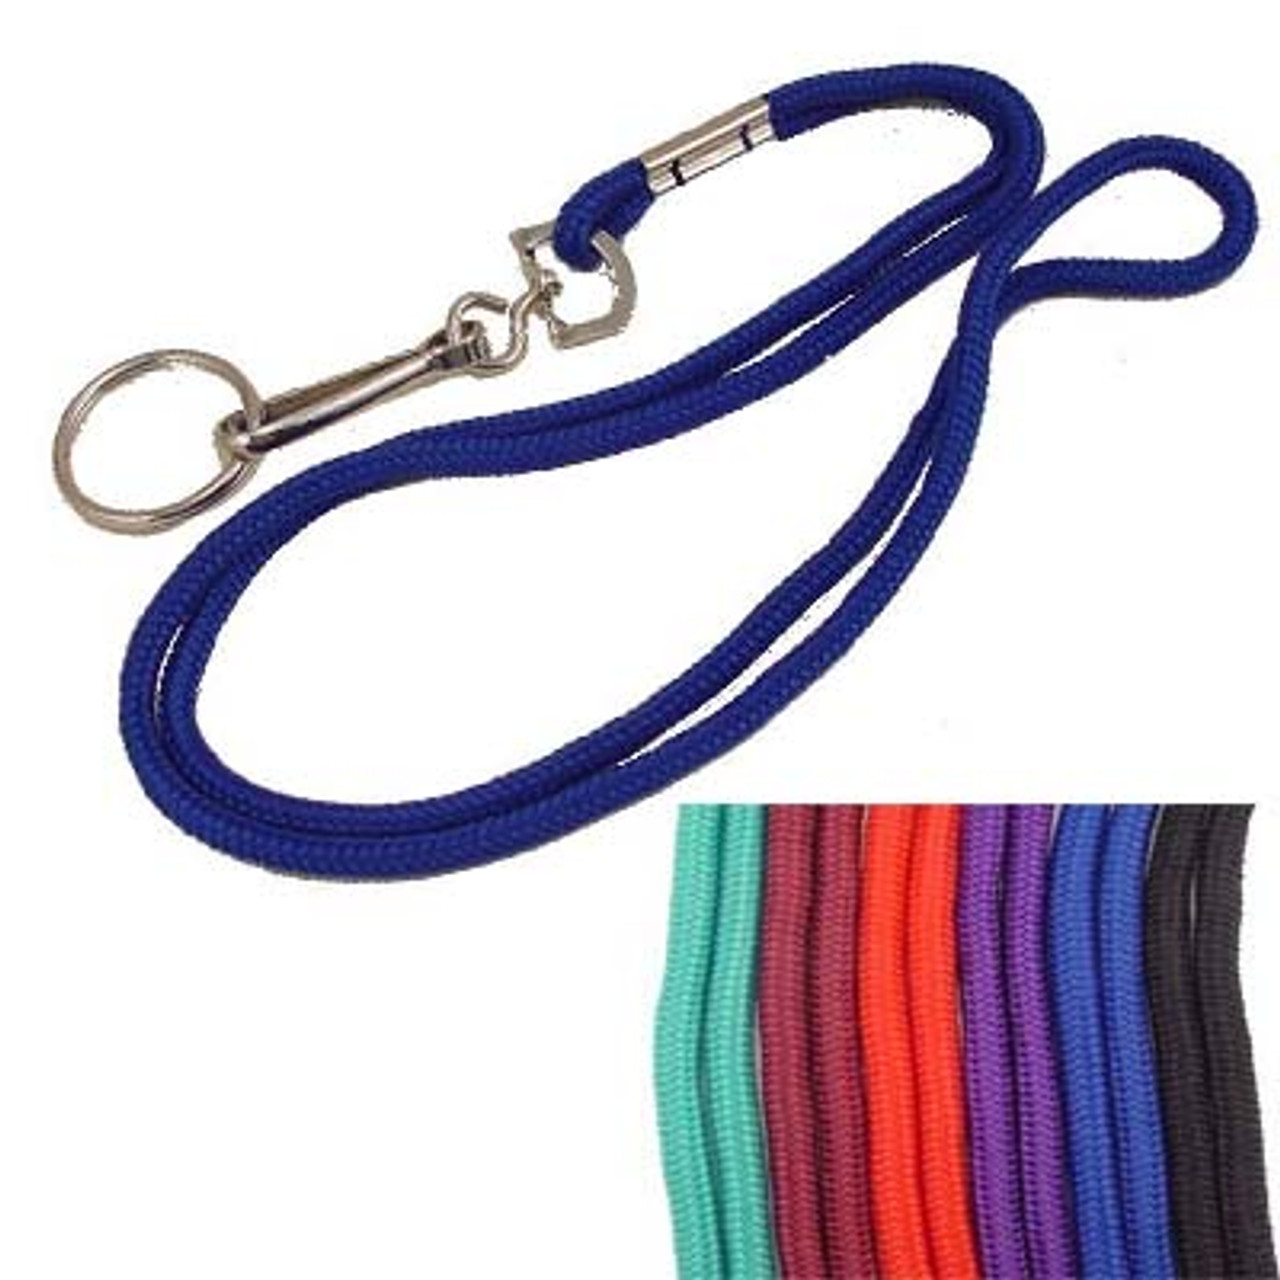 Shop for and Buy Lanyard Neck String Key Holder with Split Ring - Bulk Pack  24 PACK at . Large selection and bulk discounts available.